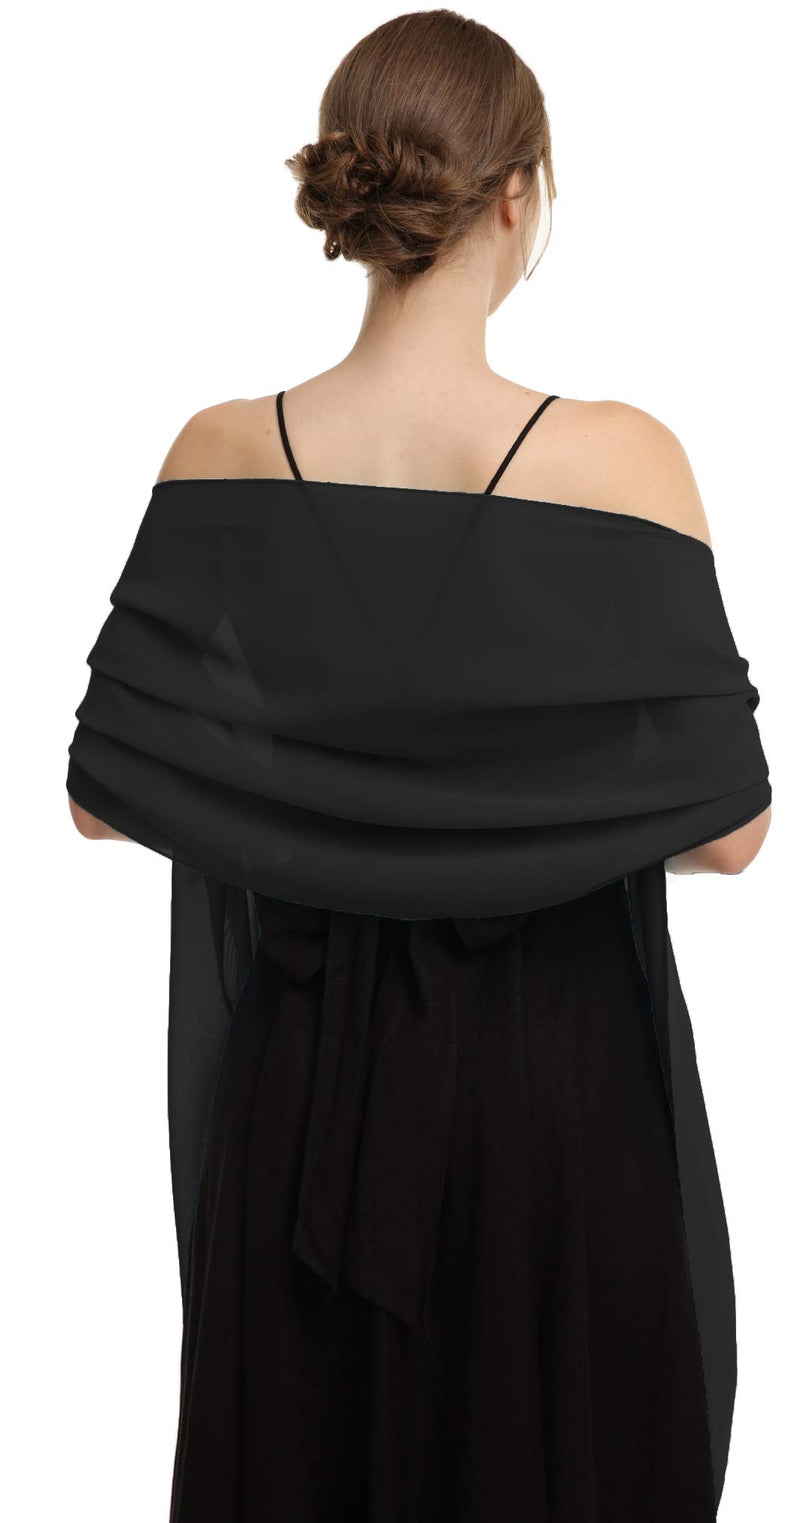 [Australia] - Chiffon Shawls Scarves Wraps for Bridal Wedding Party Evening Dress and Special Occasion Dresses Black Length(79") * Width(19") 